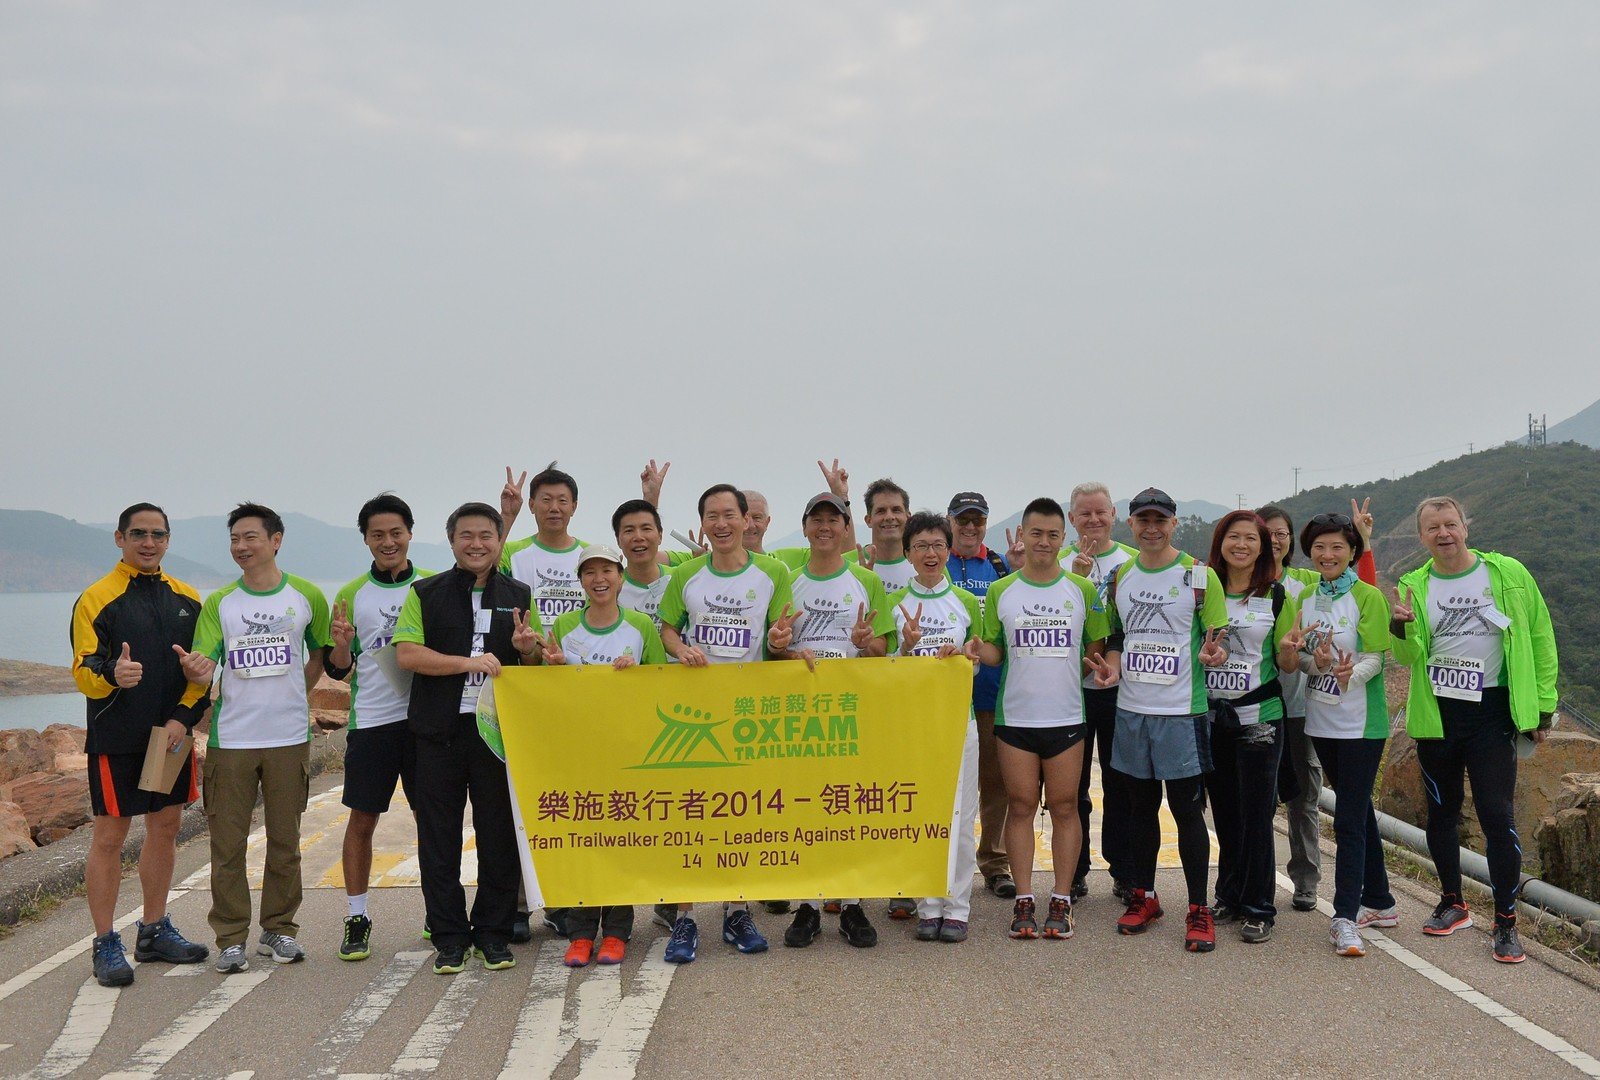 More than 20 business leaders, including Zhu Qi, Executive Director and CEO of Wing Lung Bank (fifth from the left), Lau Ming Wai, Chairman & CEO of Chinese Estates Holdings Limited (fifth from the right), and Shirley Yuen, CEO of The Hong Kong General Chamber of Commerce (sixth from the left) join the all-new ‘Oxfam Trailwalker 2014 – Leaders against Poverty Walk’ on the first day of the event.